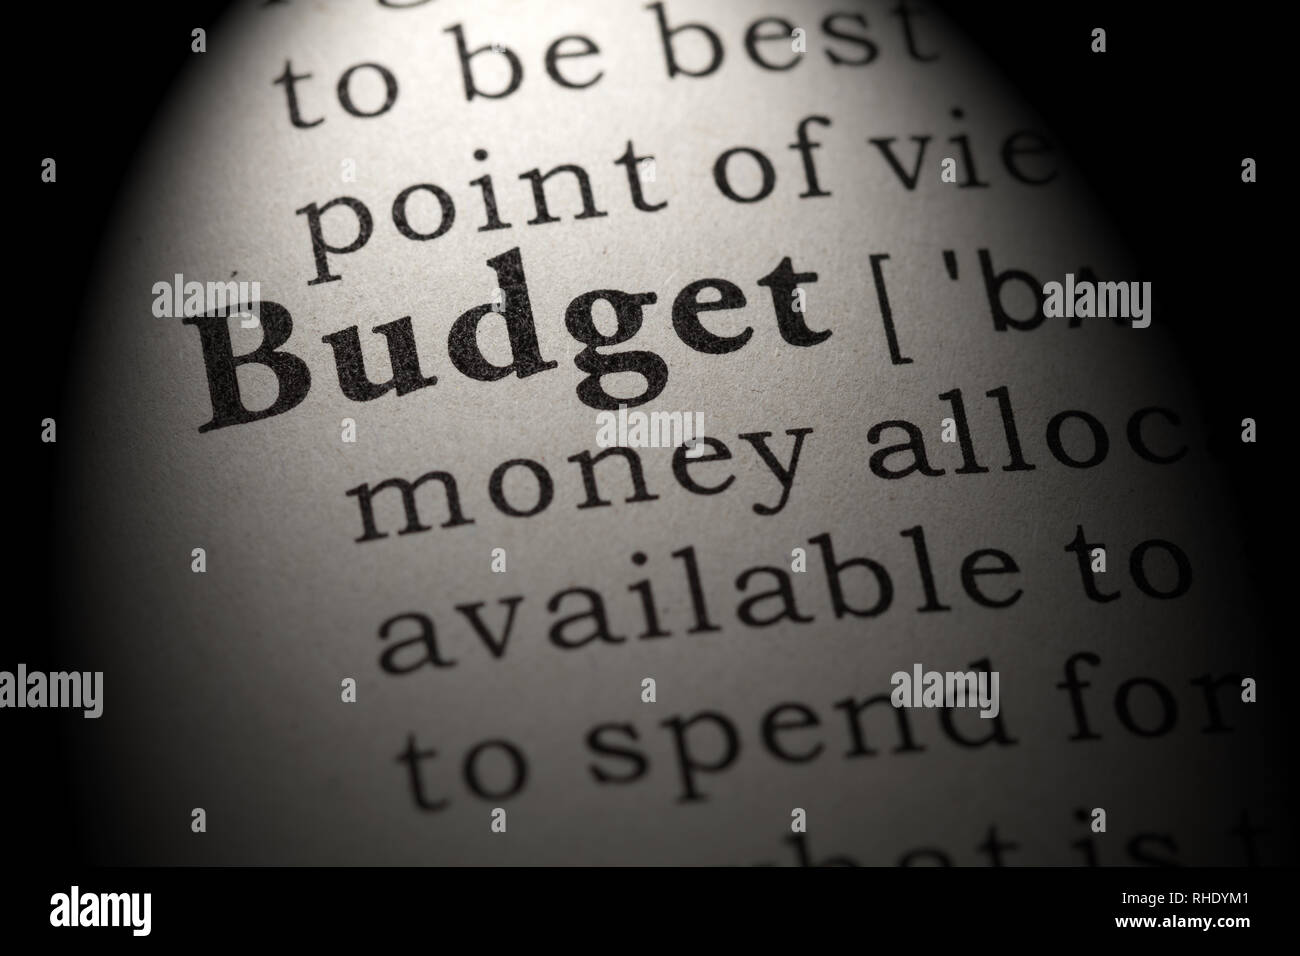 Fake Dictionary, Dictionary definition of the word budget. including key descriptive words. Stock Photo